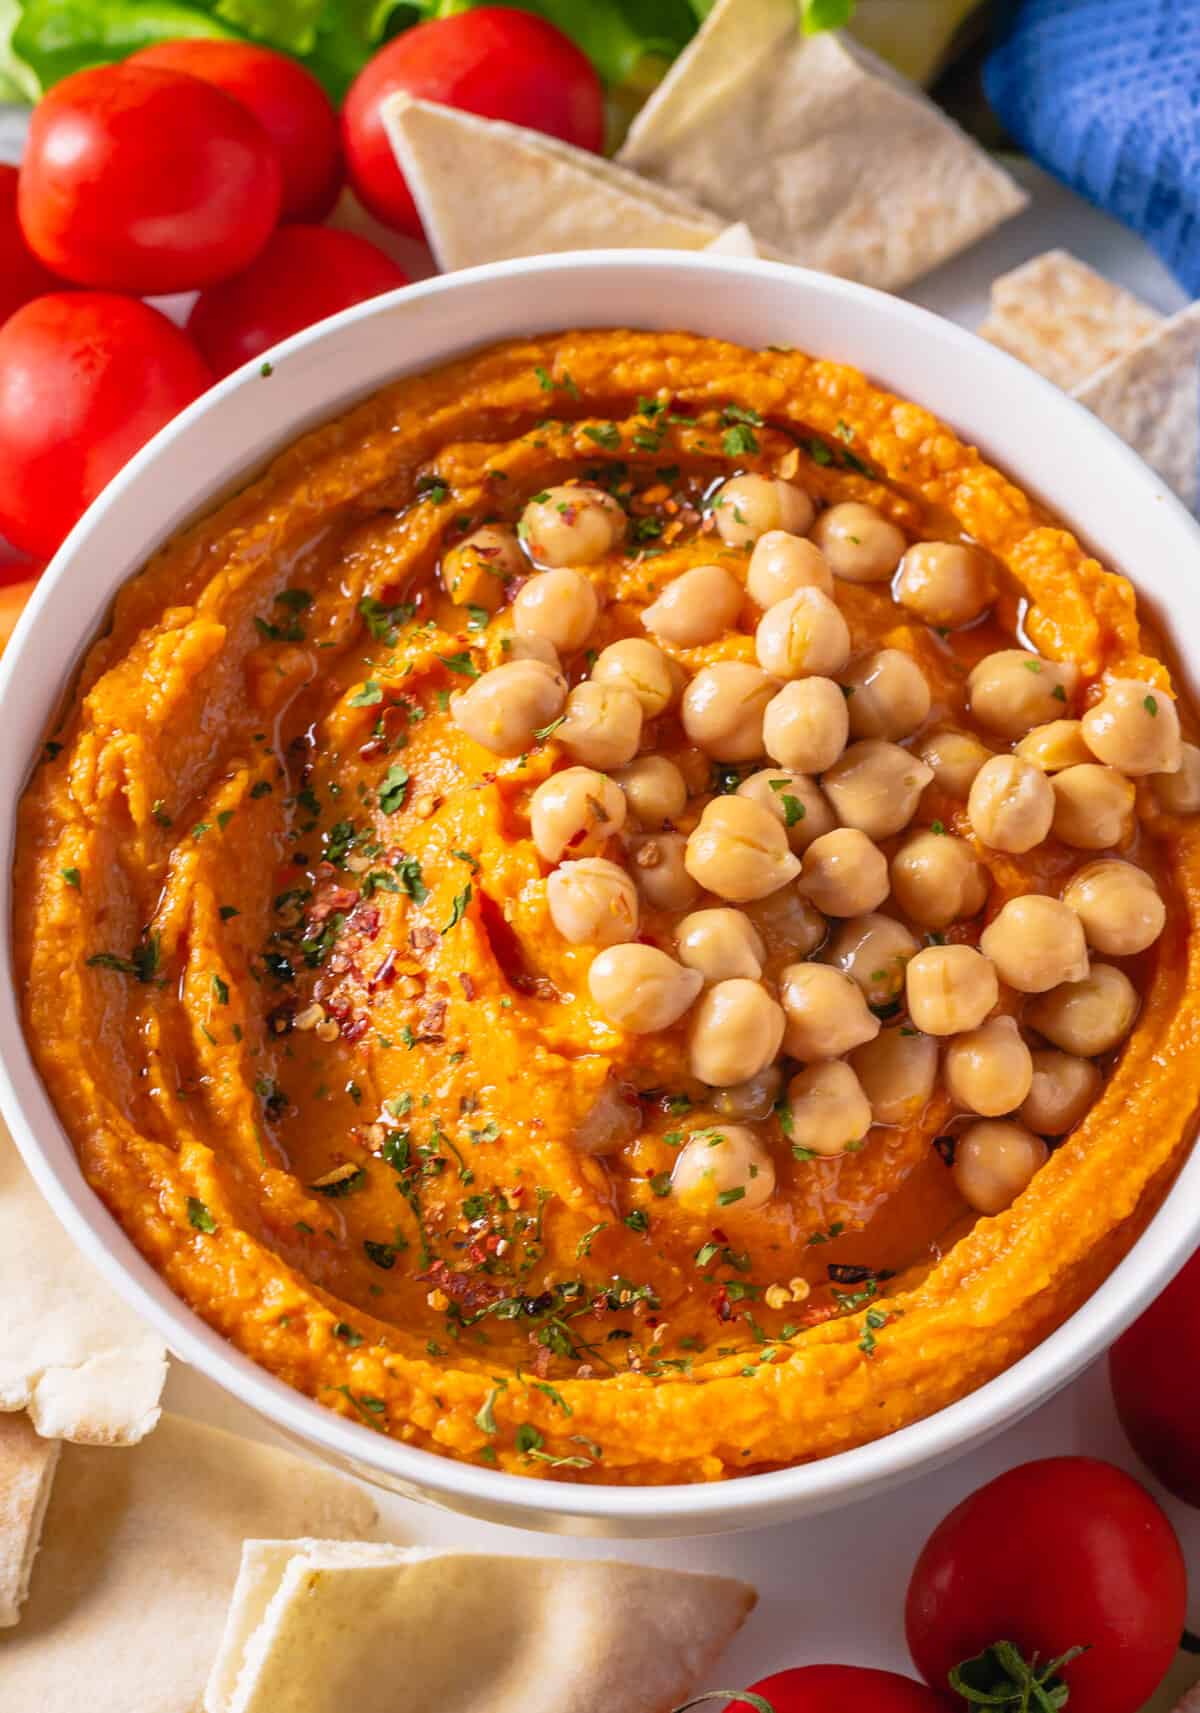 Pumpkin hummus is topped with chickpeas. 